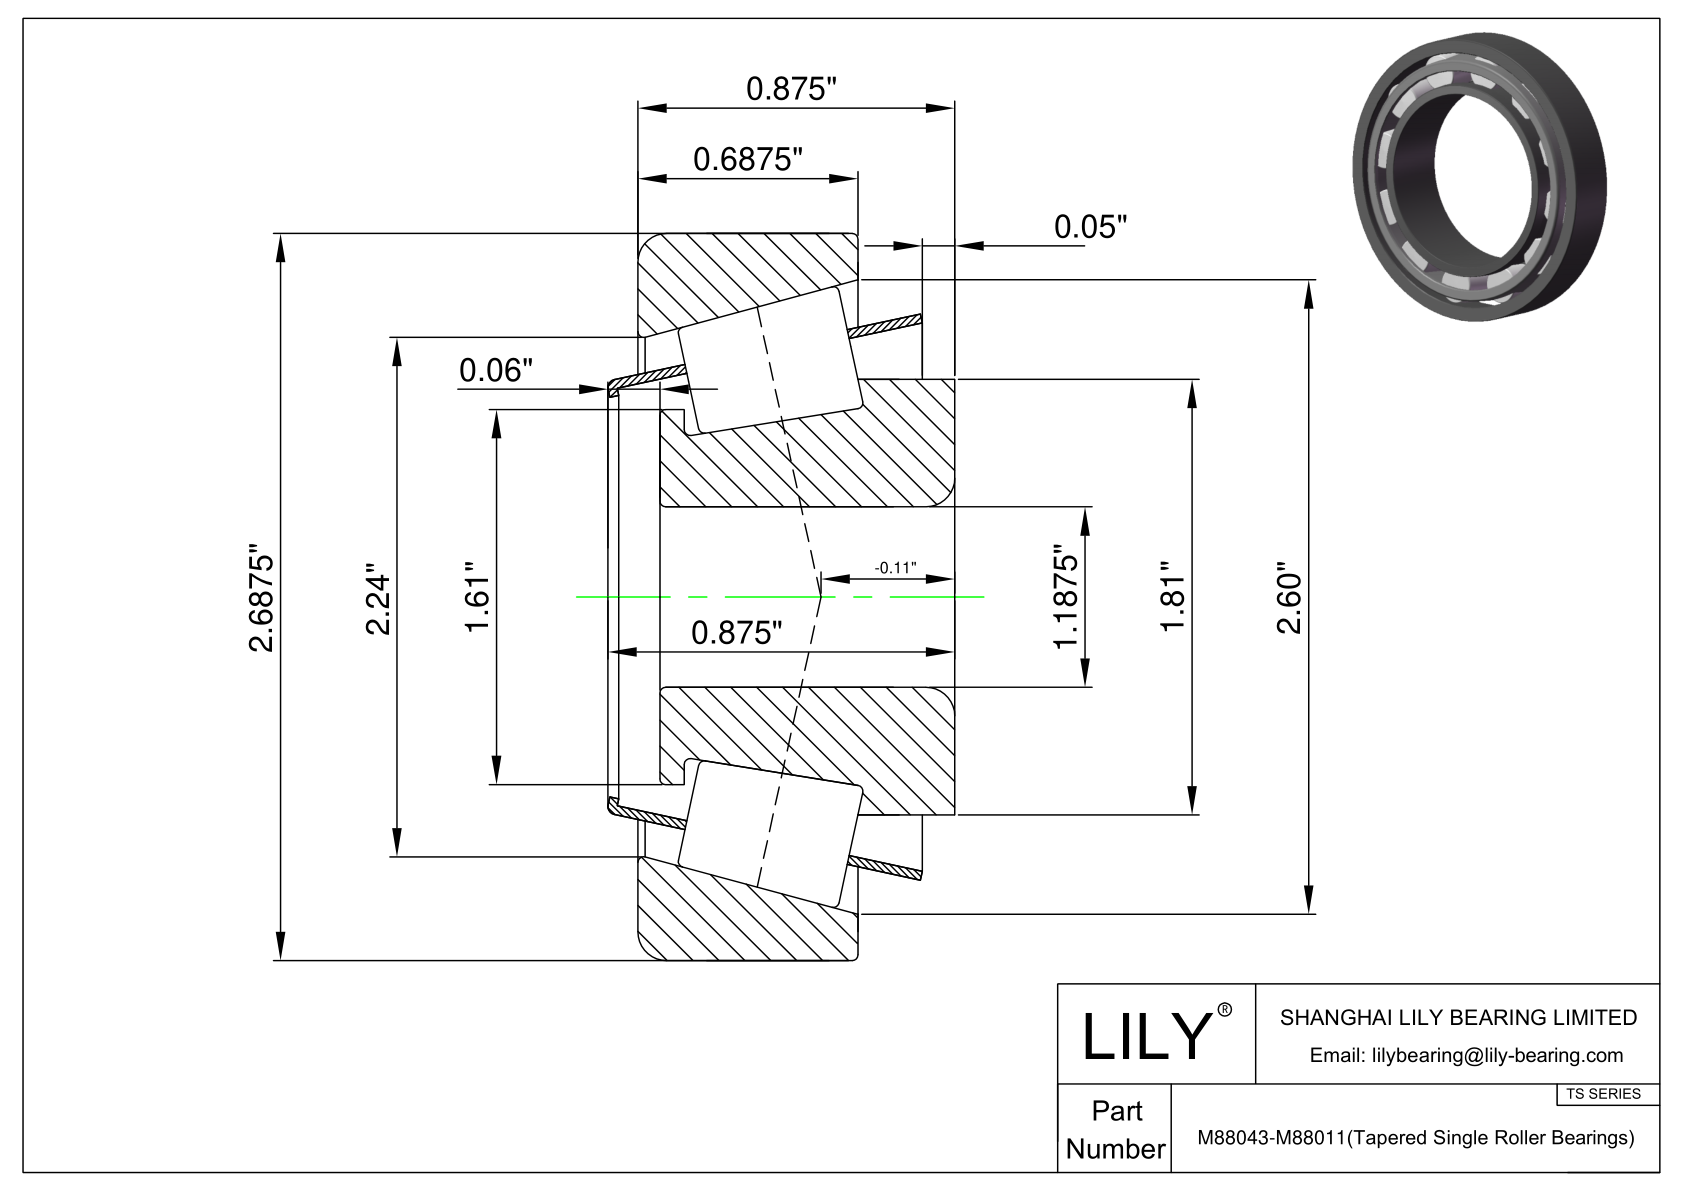 M88043-M88011 TS (Tapered Single Roller Bearings) (Imperial) cad drawing